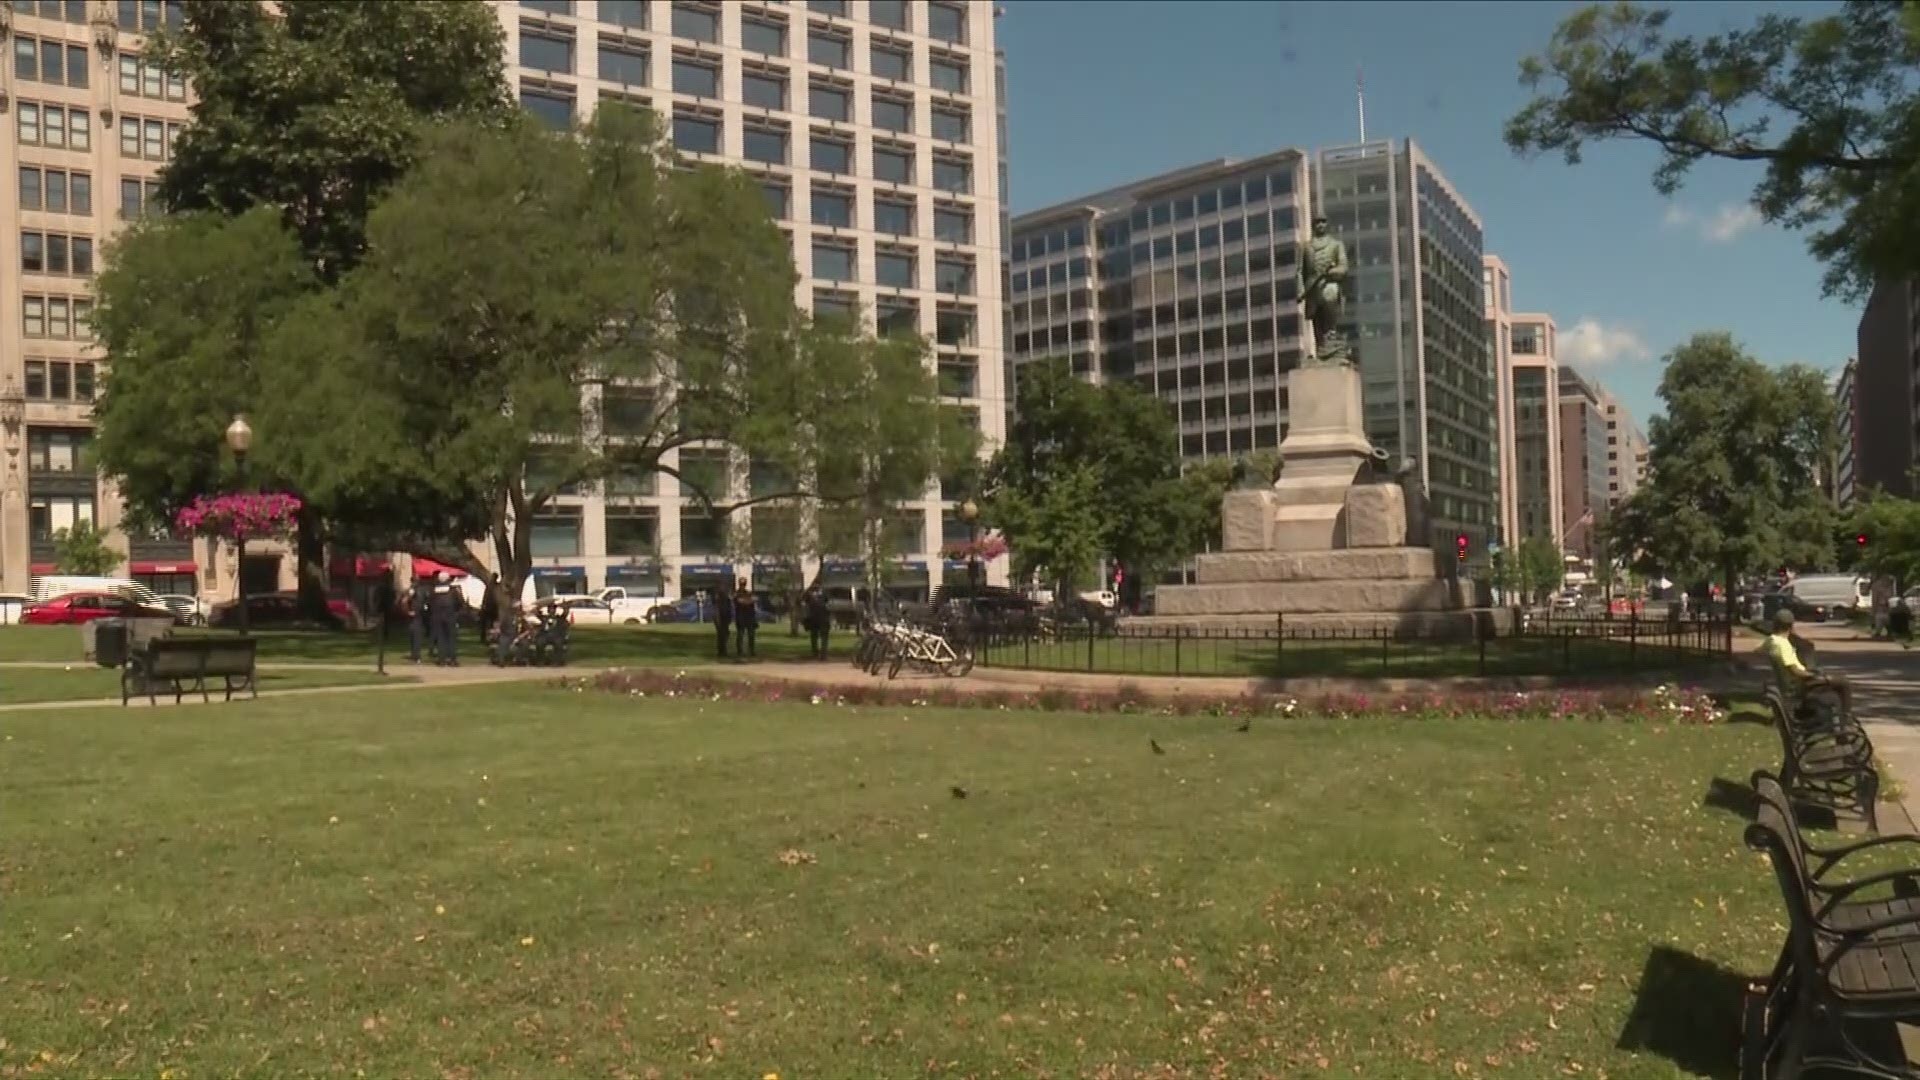 Officers on bikes are posted at the Farragut Square statue in D.C.